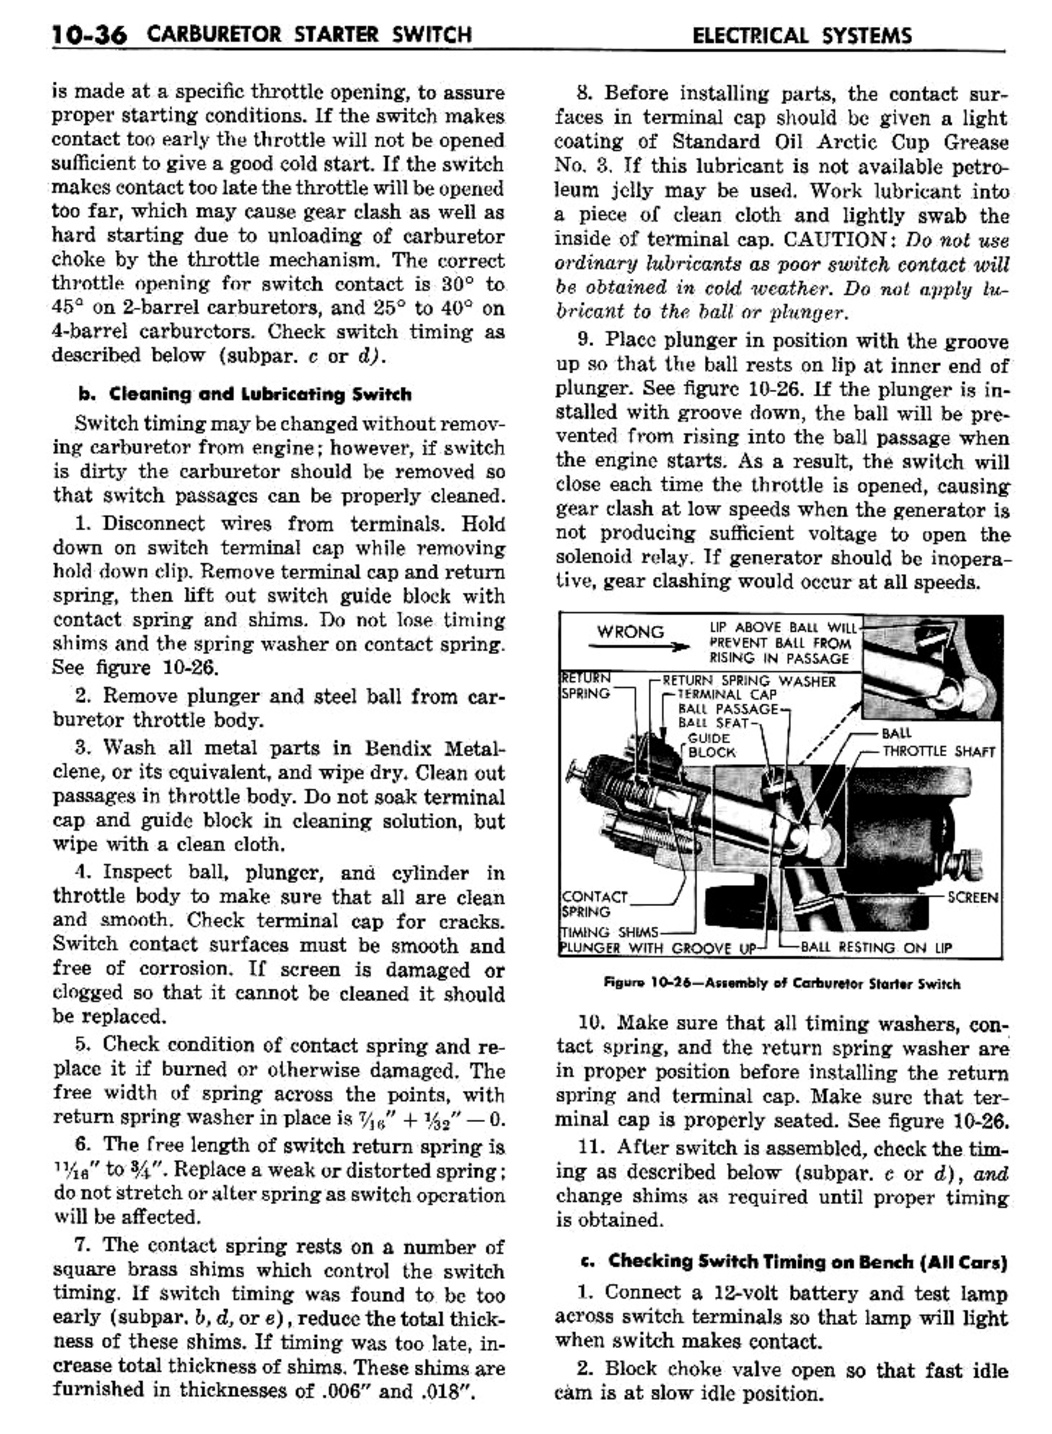 n_11 1957 Buick Shop Manual - Electrical Systems-036-036.jpg